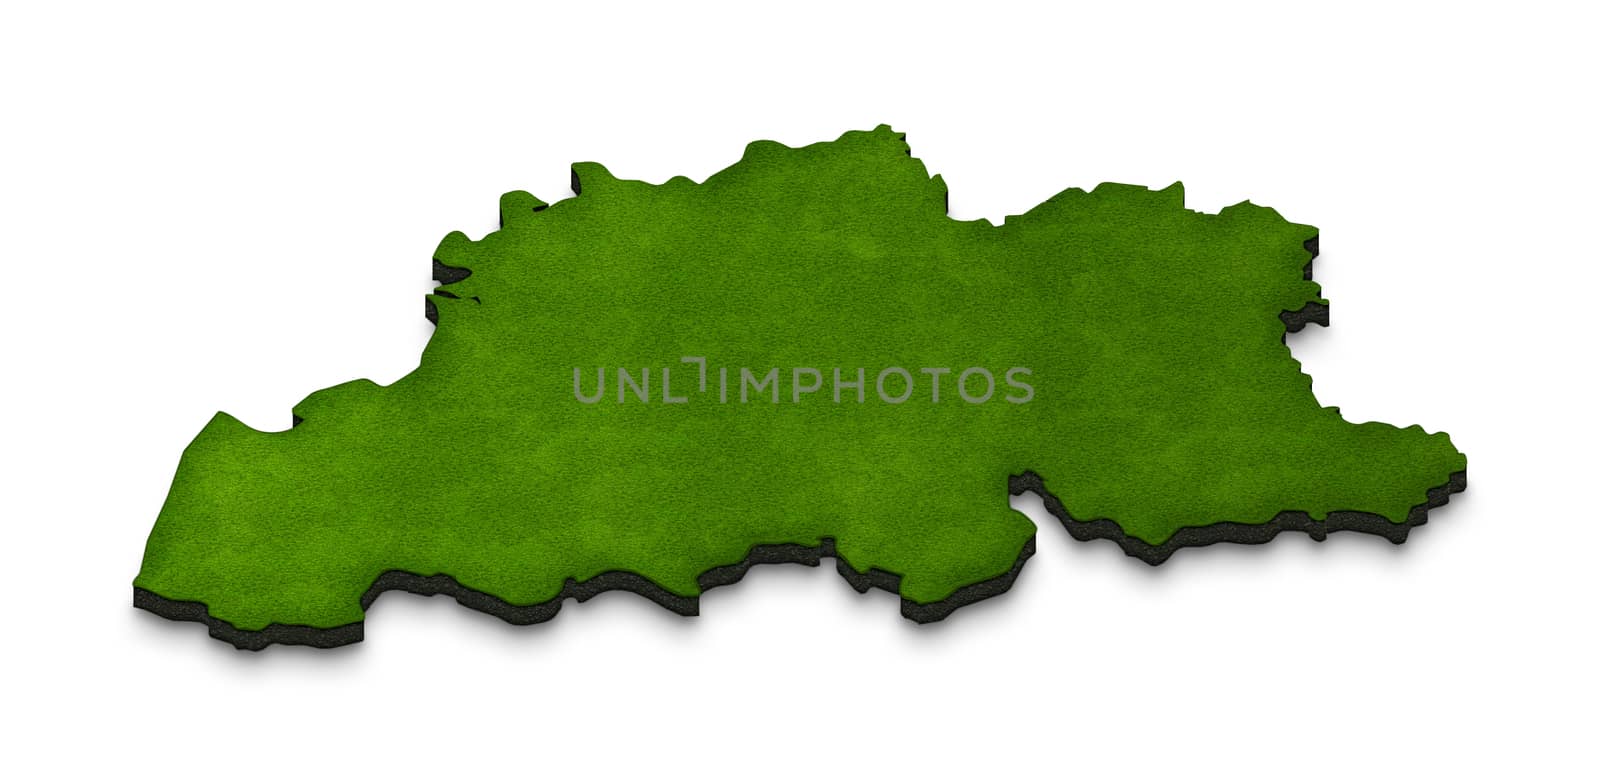 Illustration of a green ground map of Belgium on white isolated background. Right 3D isometric perspective projection.